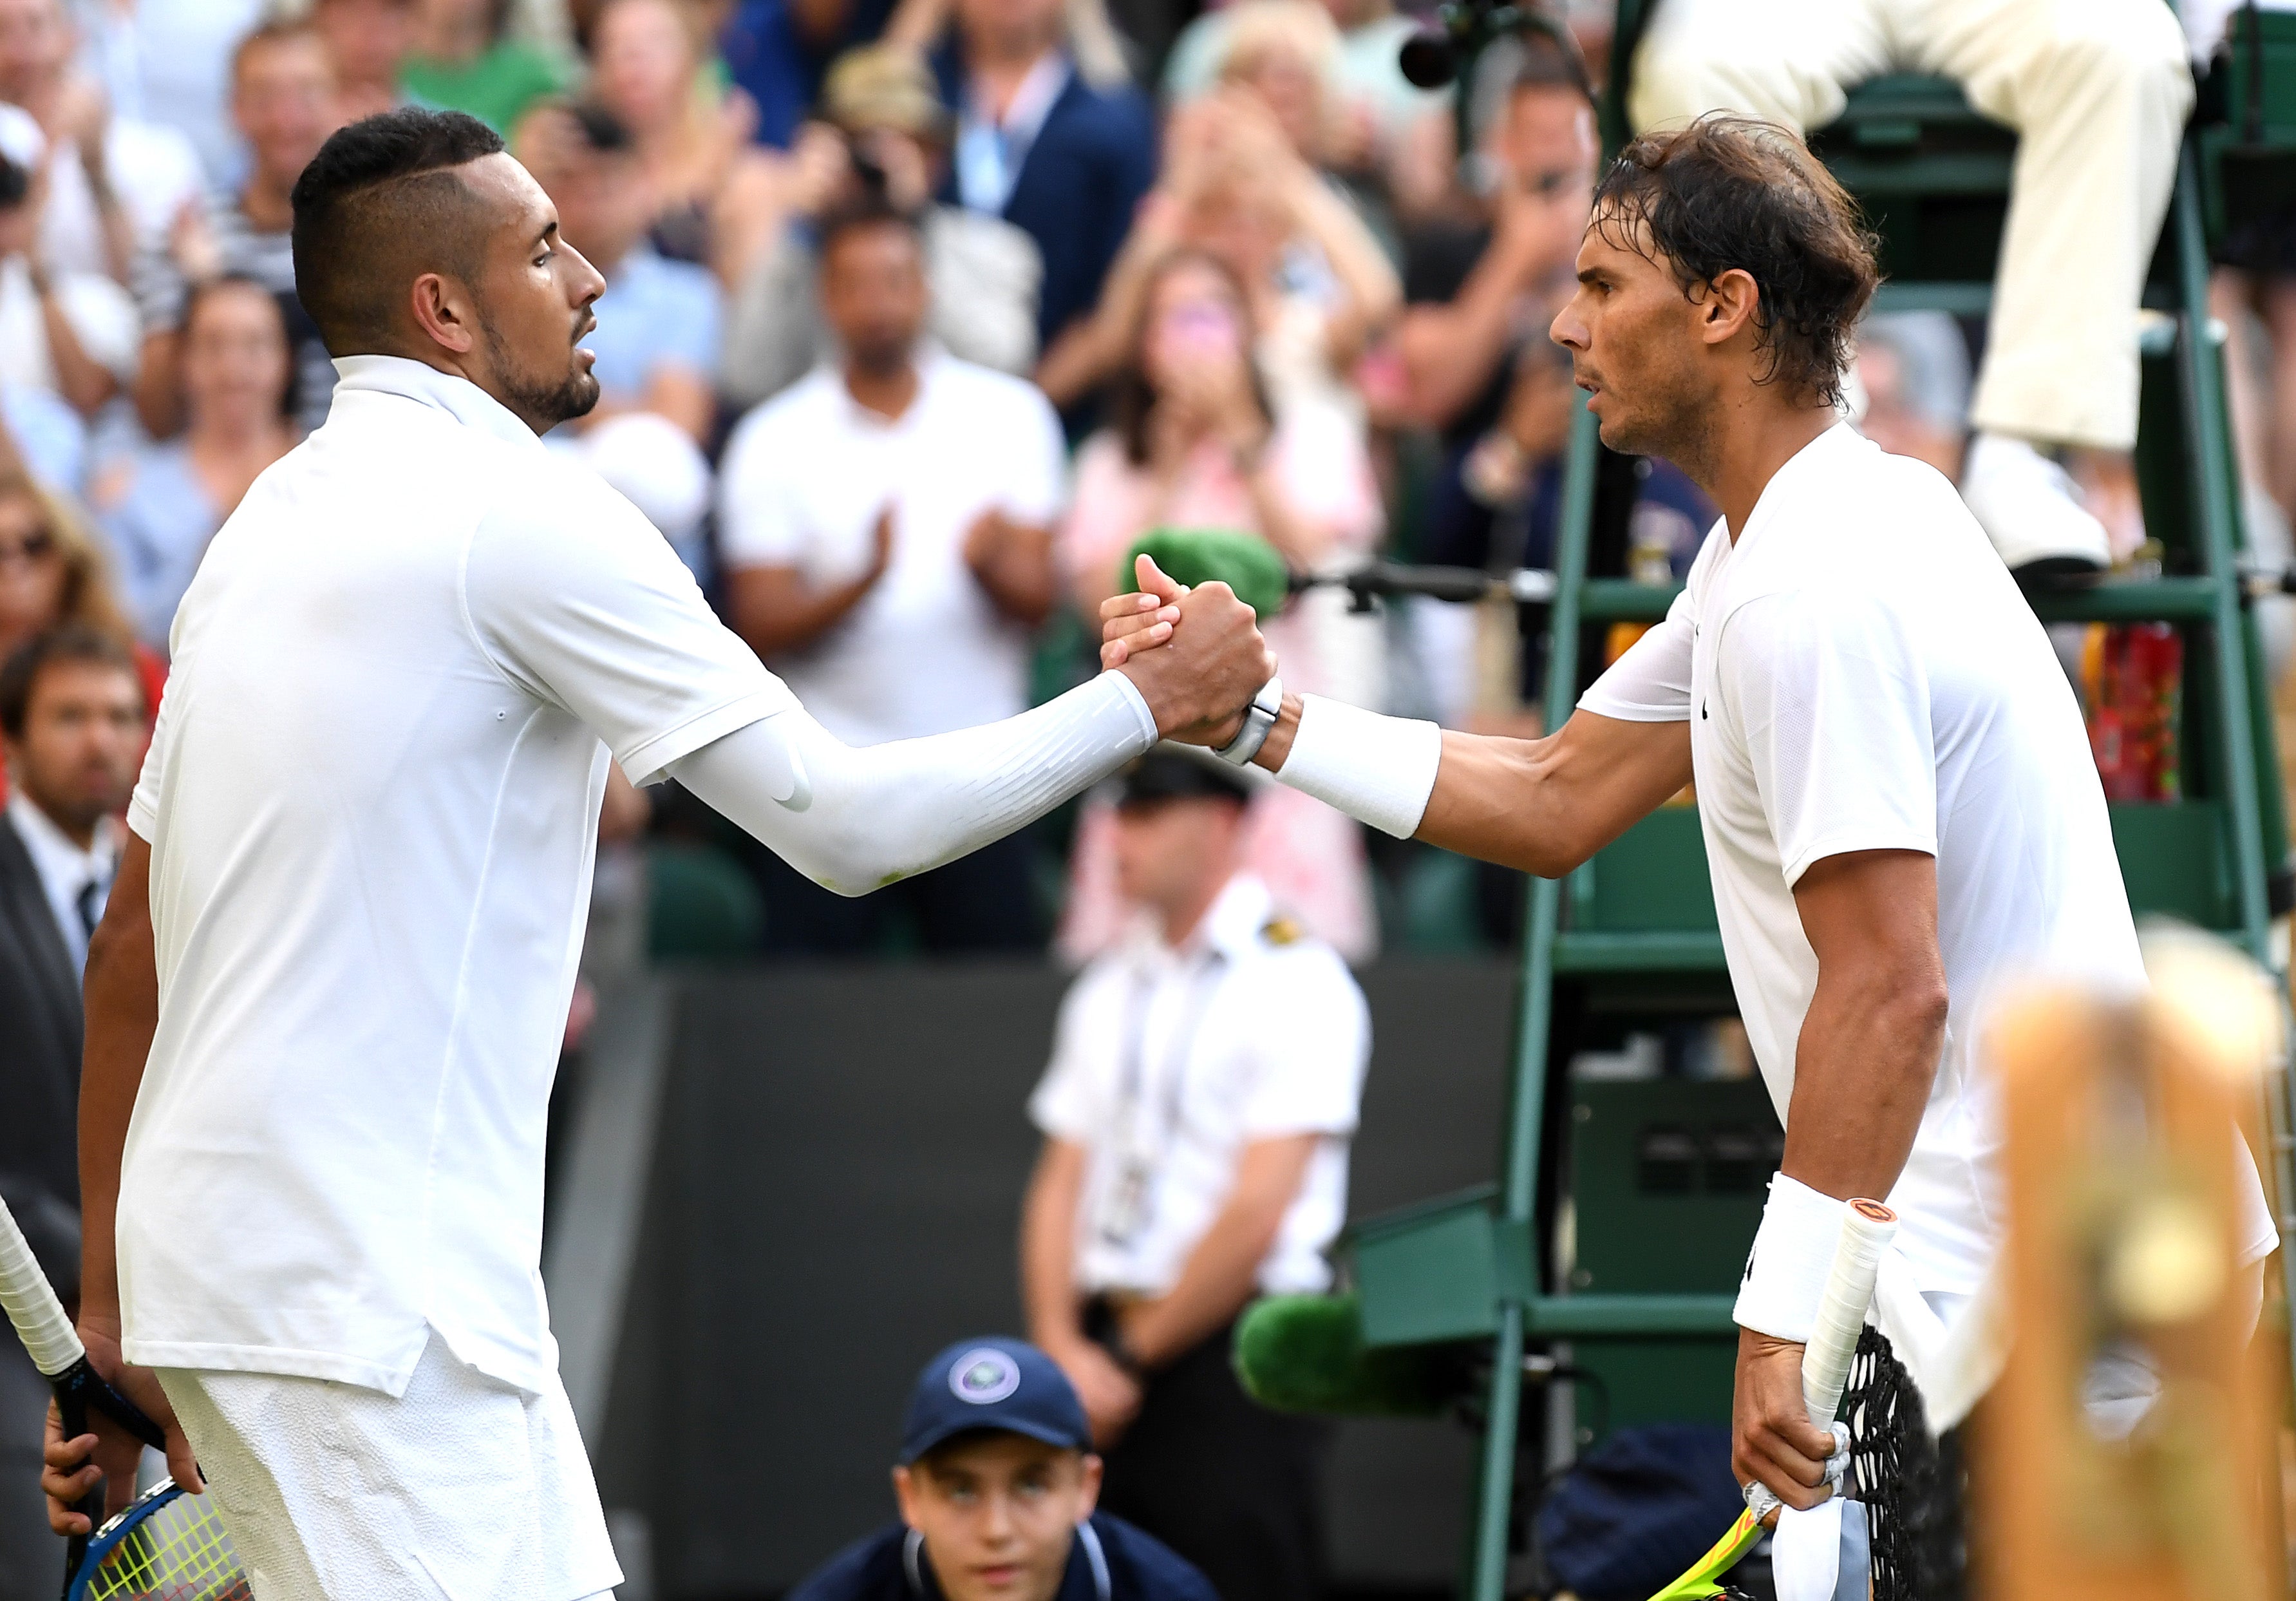 Kyrgios wore a white sleeve during that match with Nadal to cover up evidence of self-harm